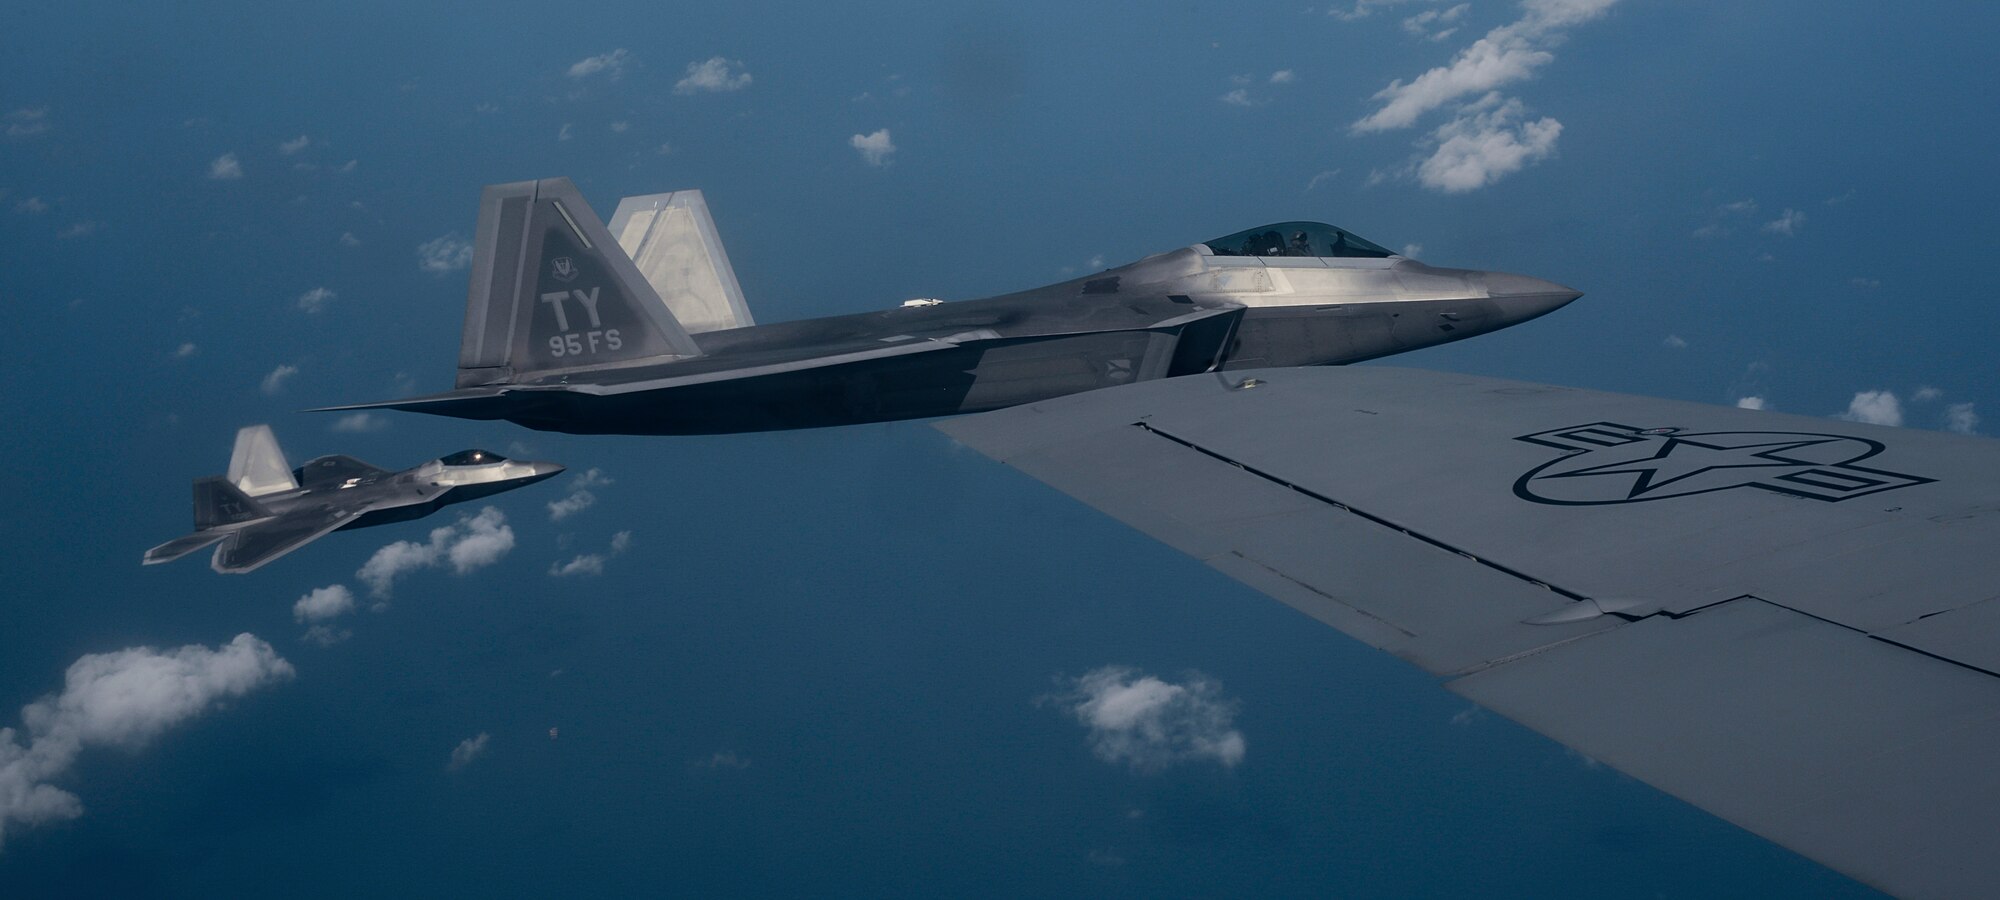 Two U.S. Air Force 95th Fighter Squadron F-22 Raptors from Tyndall Air Force Base, Fla., fly alongside a 100th Air Refueling Wing KC-135 Stratotanker assigned to RAF Mildenhall, England, April 19, 2016, over the Norfolk Sea. The fifth generation, multi-role fighter aircraft participated to maximize training opportunities, affirm enduring commitments to NATO allies, and deter any actions that destabilize regional security. (U.S. Air Force photo by Senior Airman Victoria H. Taylor/Released)